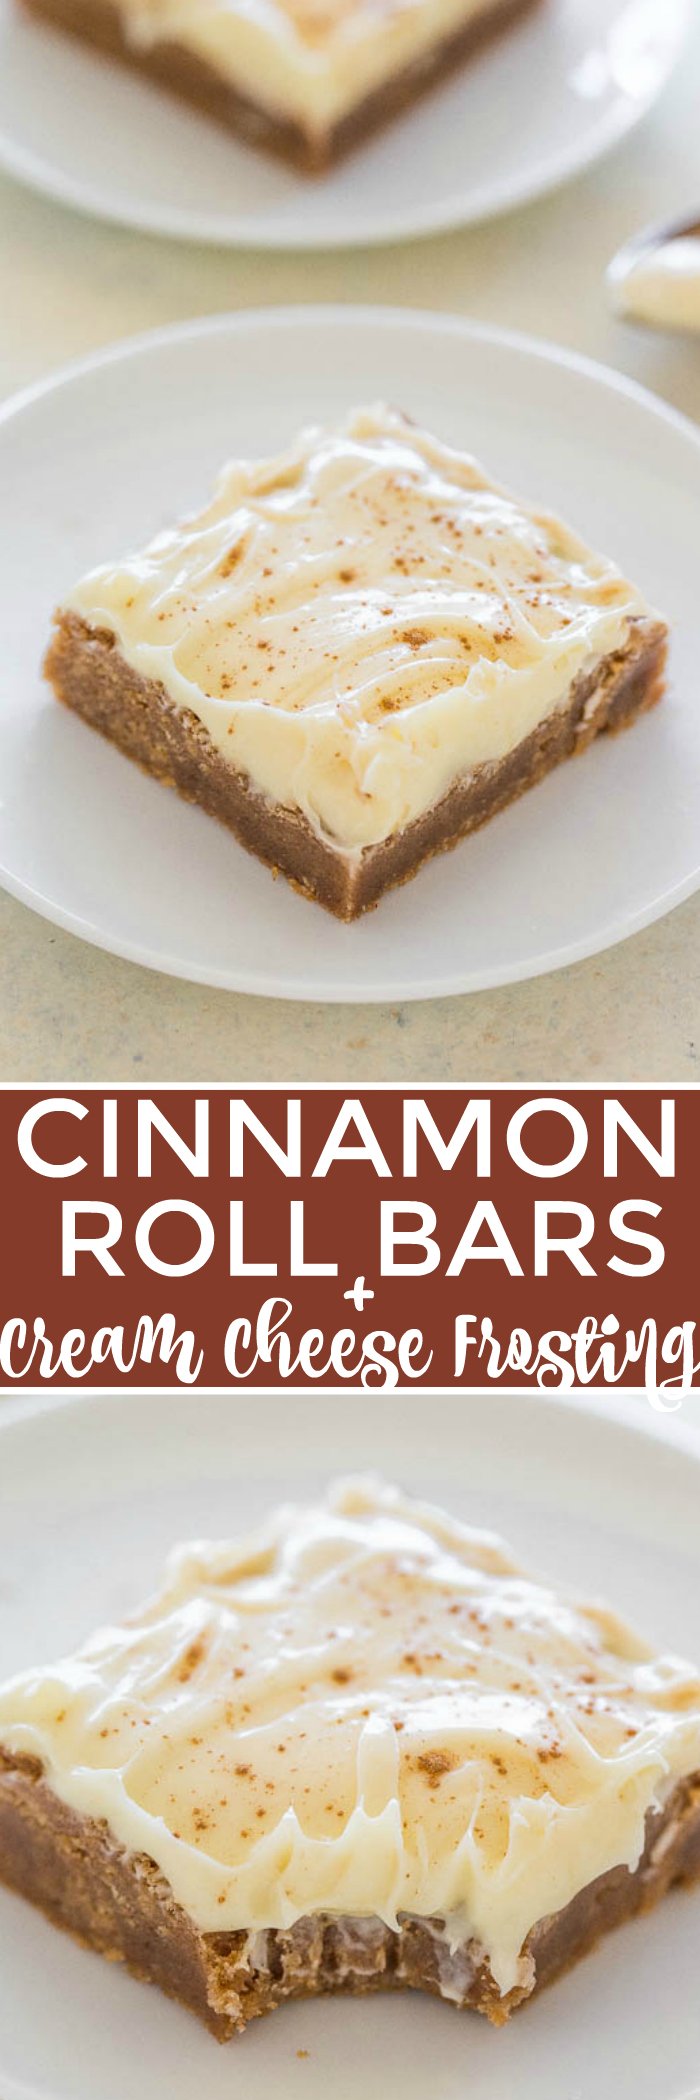 Cinnamon Roll Bars with Cream Cheese Frosting - All the flavor of cinnamon rolls, minus the work!! EASY, bold cinnamon flavor, super soft, chewy, and the FROSTING truly is the icing on the cake!!